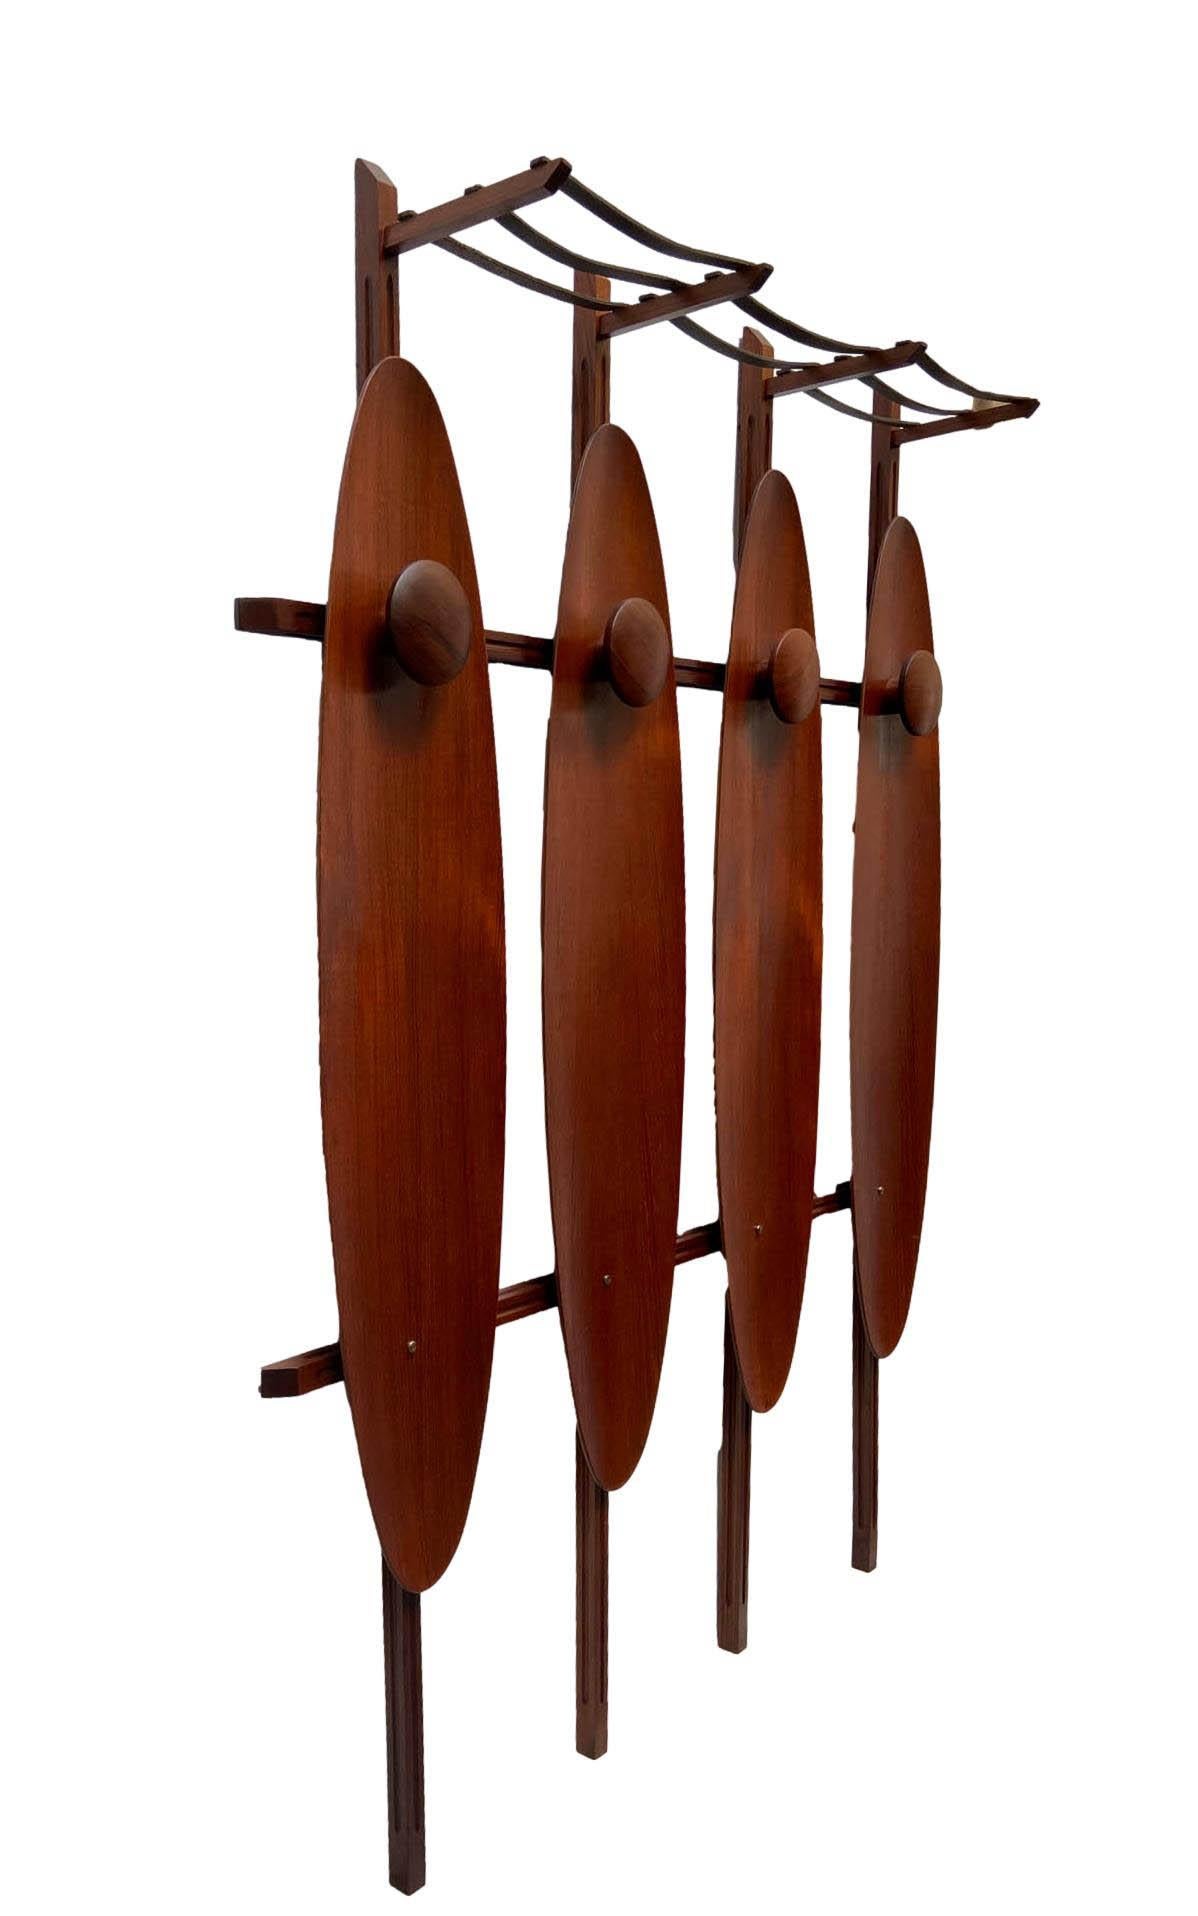 Wall-mounted wooden coat hanger and hat rack with leather straps. Italian manufacture, period 1960s.